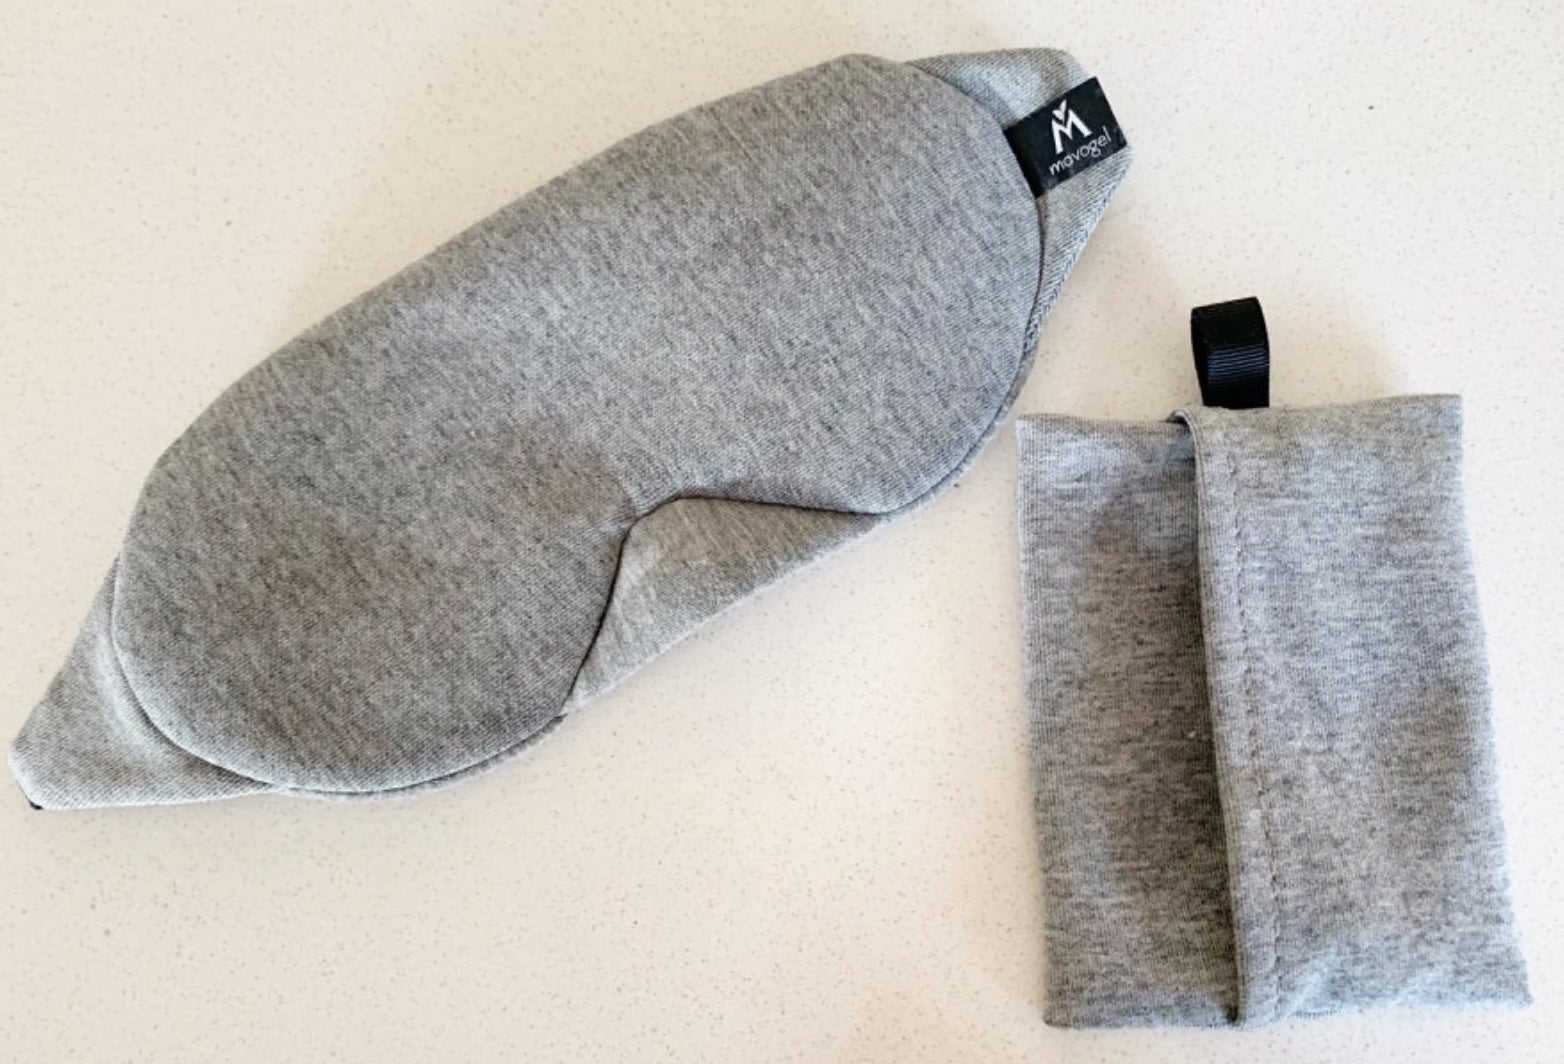 Reviewer image of the gray eye mask with carrying case